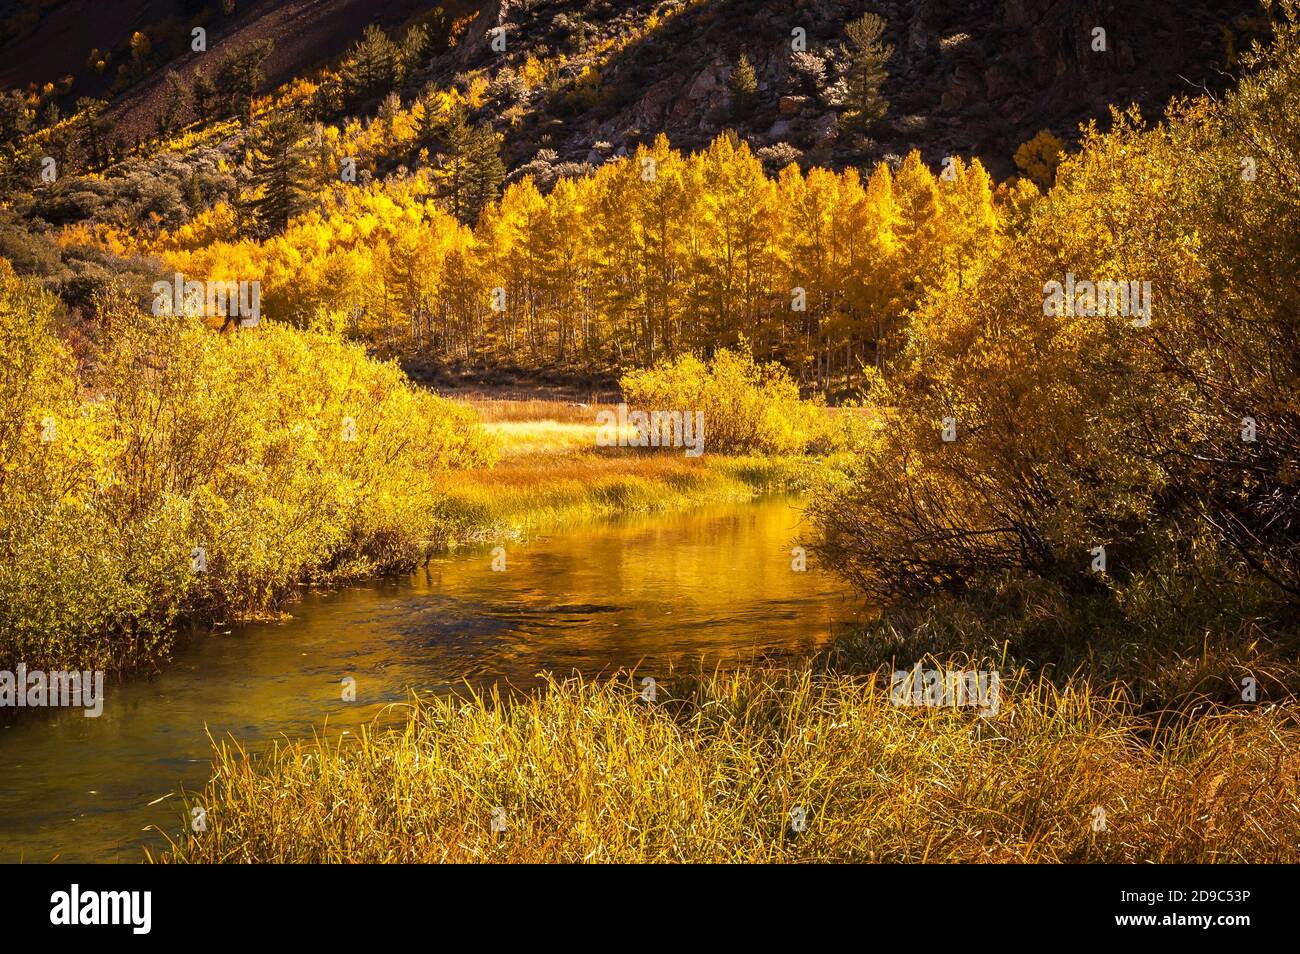 Amazing fall colors along a mountain stream in the Sierra Nevada mountains. Stock Photo